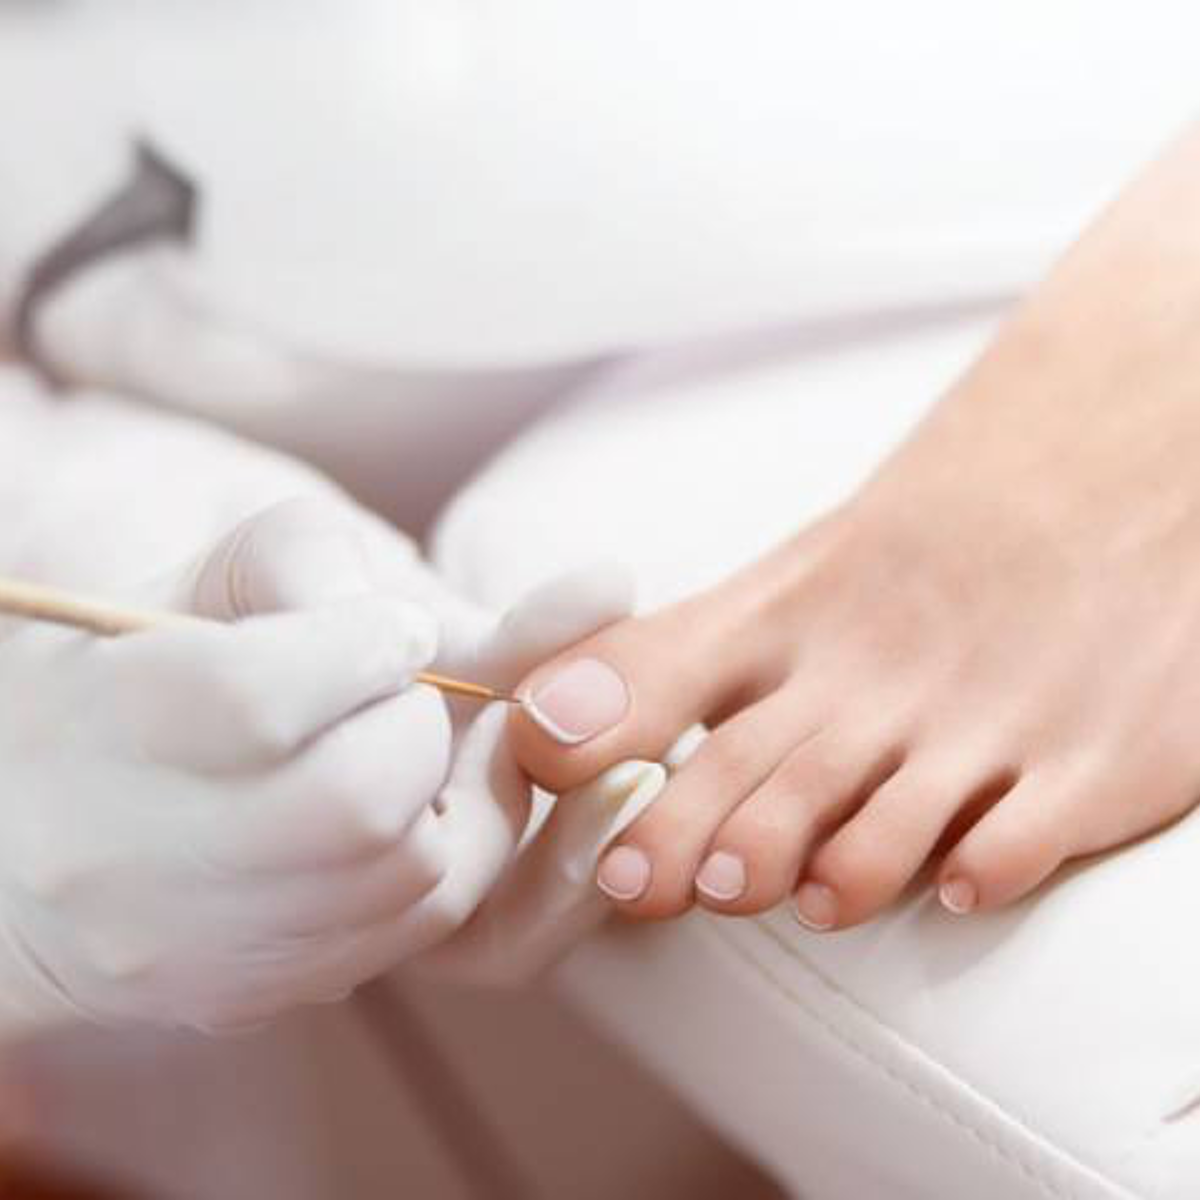 How Much Does a Pedicure Cost? - The Beauty Institute